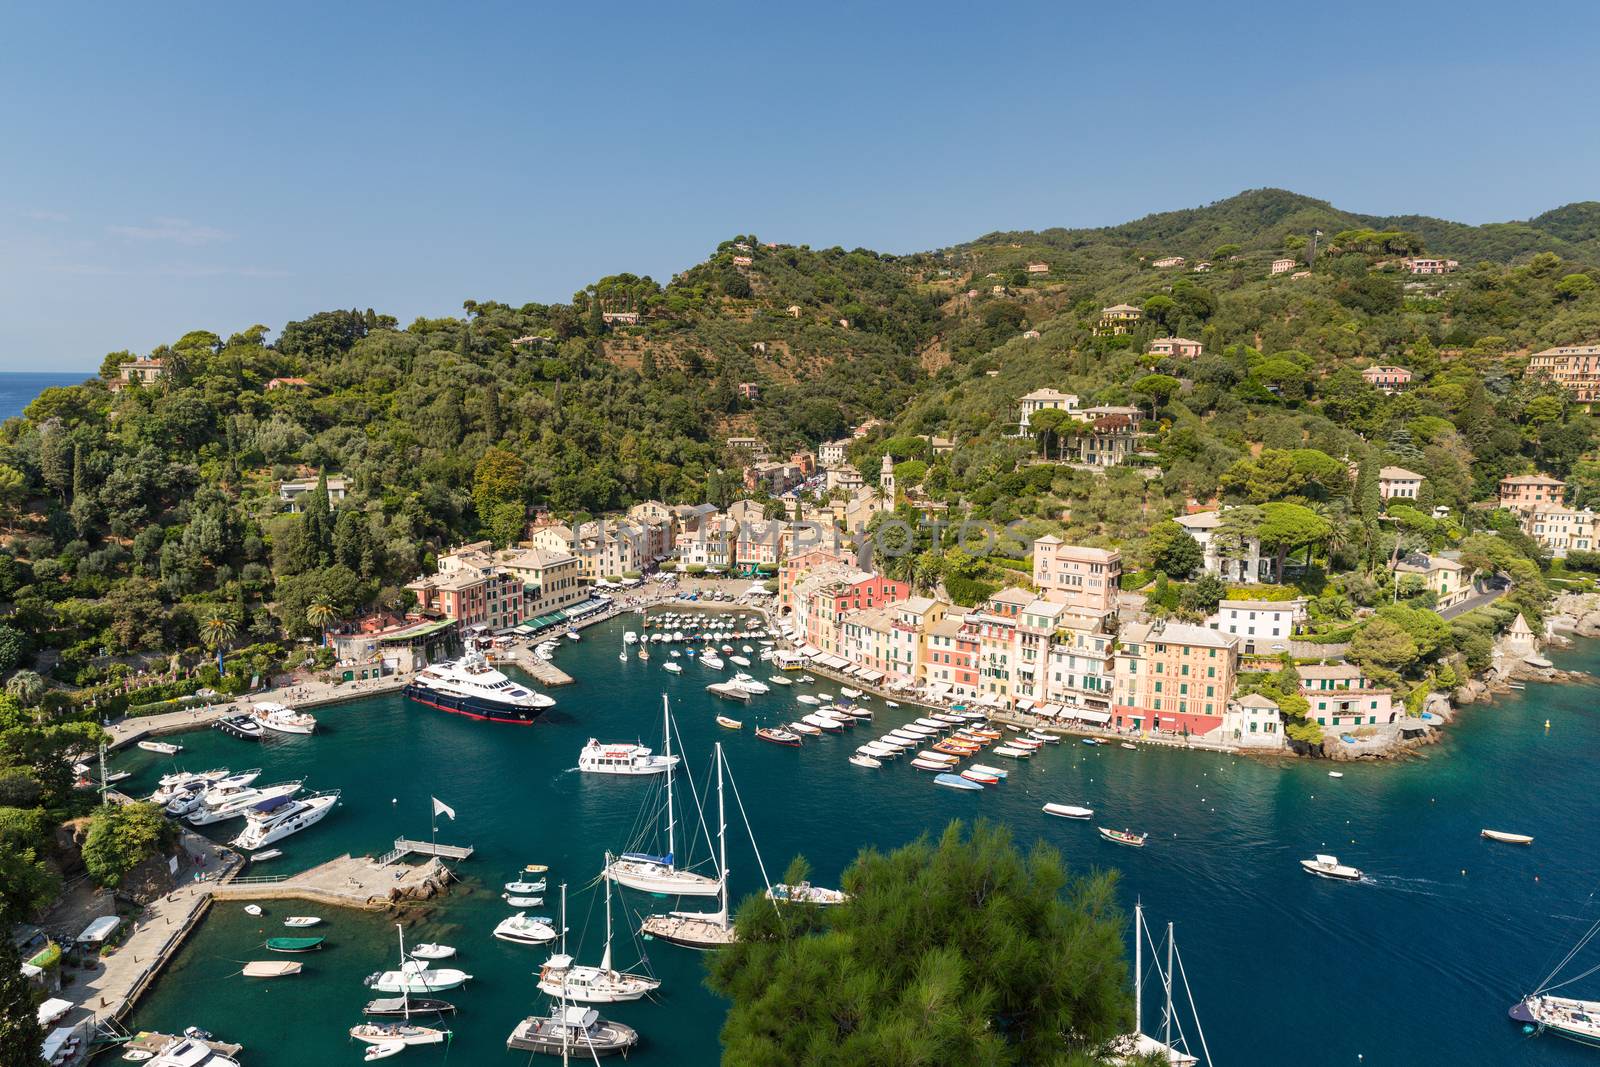 Portofino in Italy taken from the top of the opposite hill by chrisukphoto